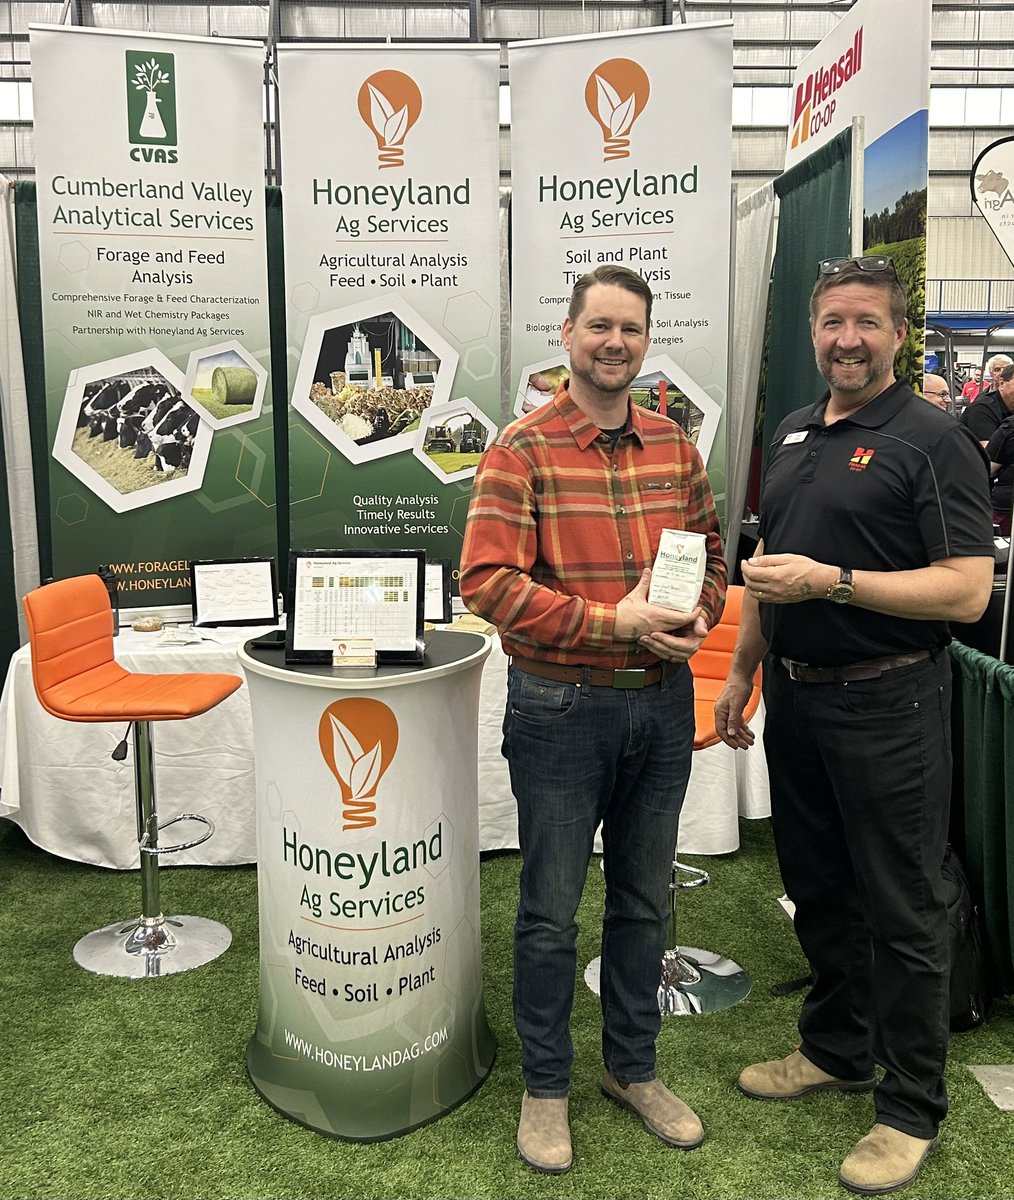 Kicking this years #GreatlakeYEN High yield wheat project off by delivering the soil sample to Chris @Honeylandag “Every agronomy decision should start with a soil sample” @GreatLakesYEN @WheatPete @realagriculture @HDCAgronomy @HDCGrain @LdnFarmShow #HensallCoopTilburyHarrow